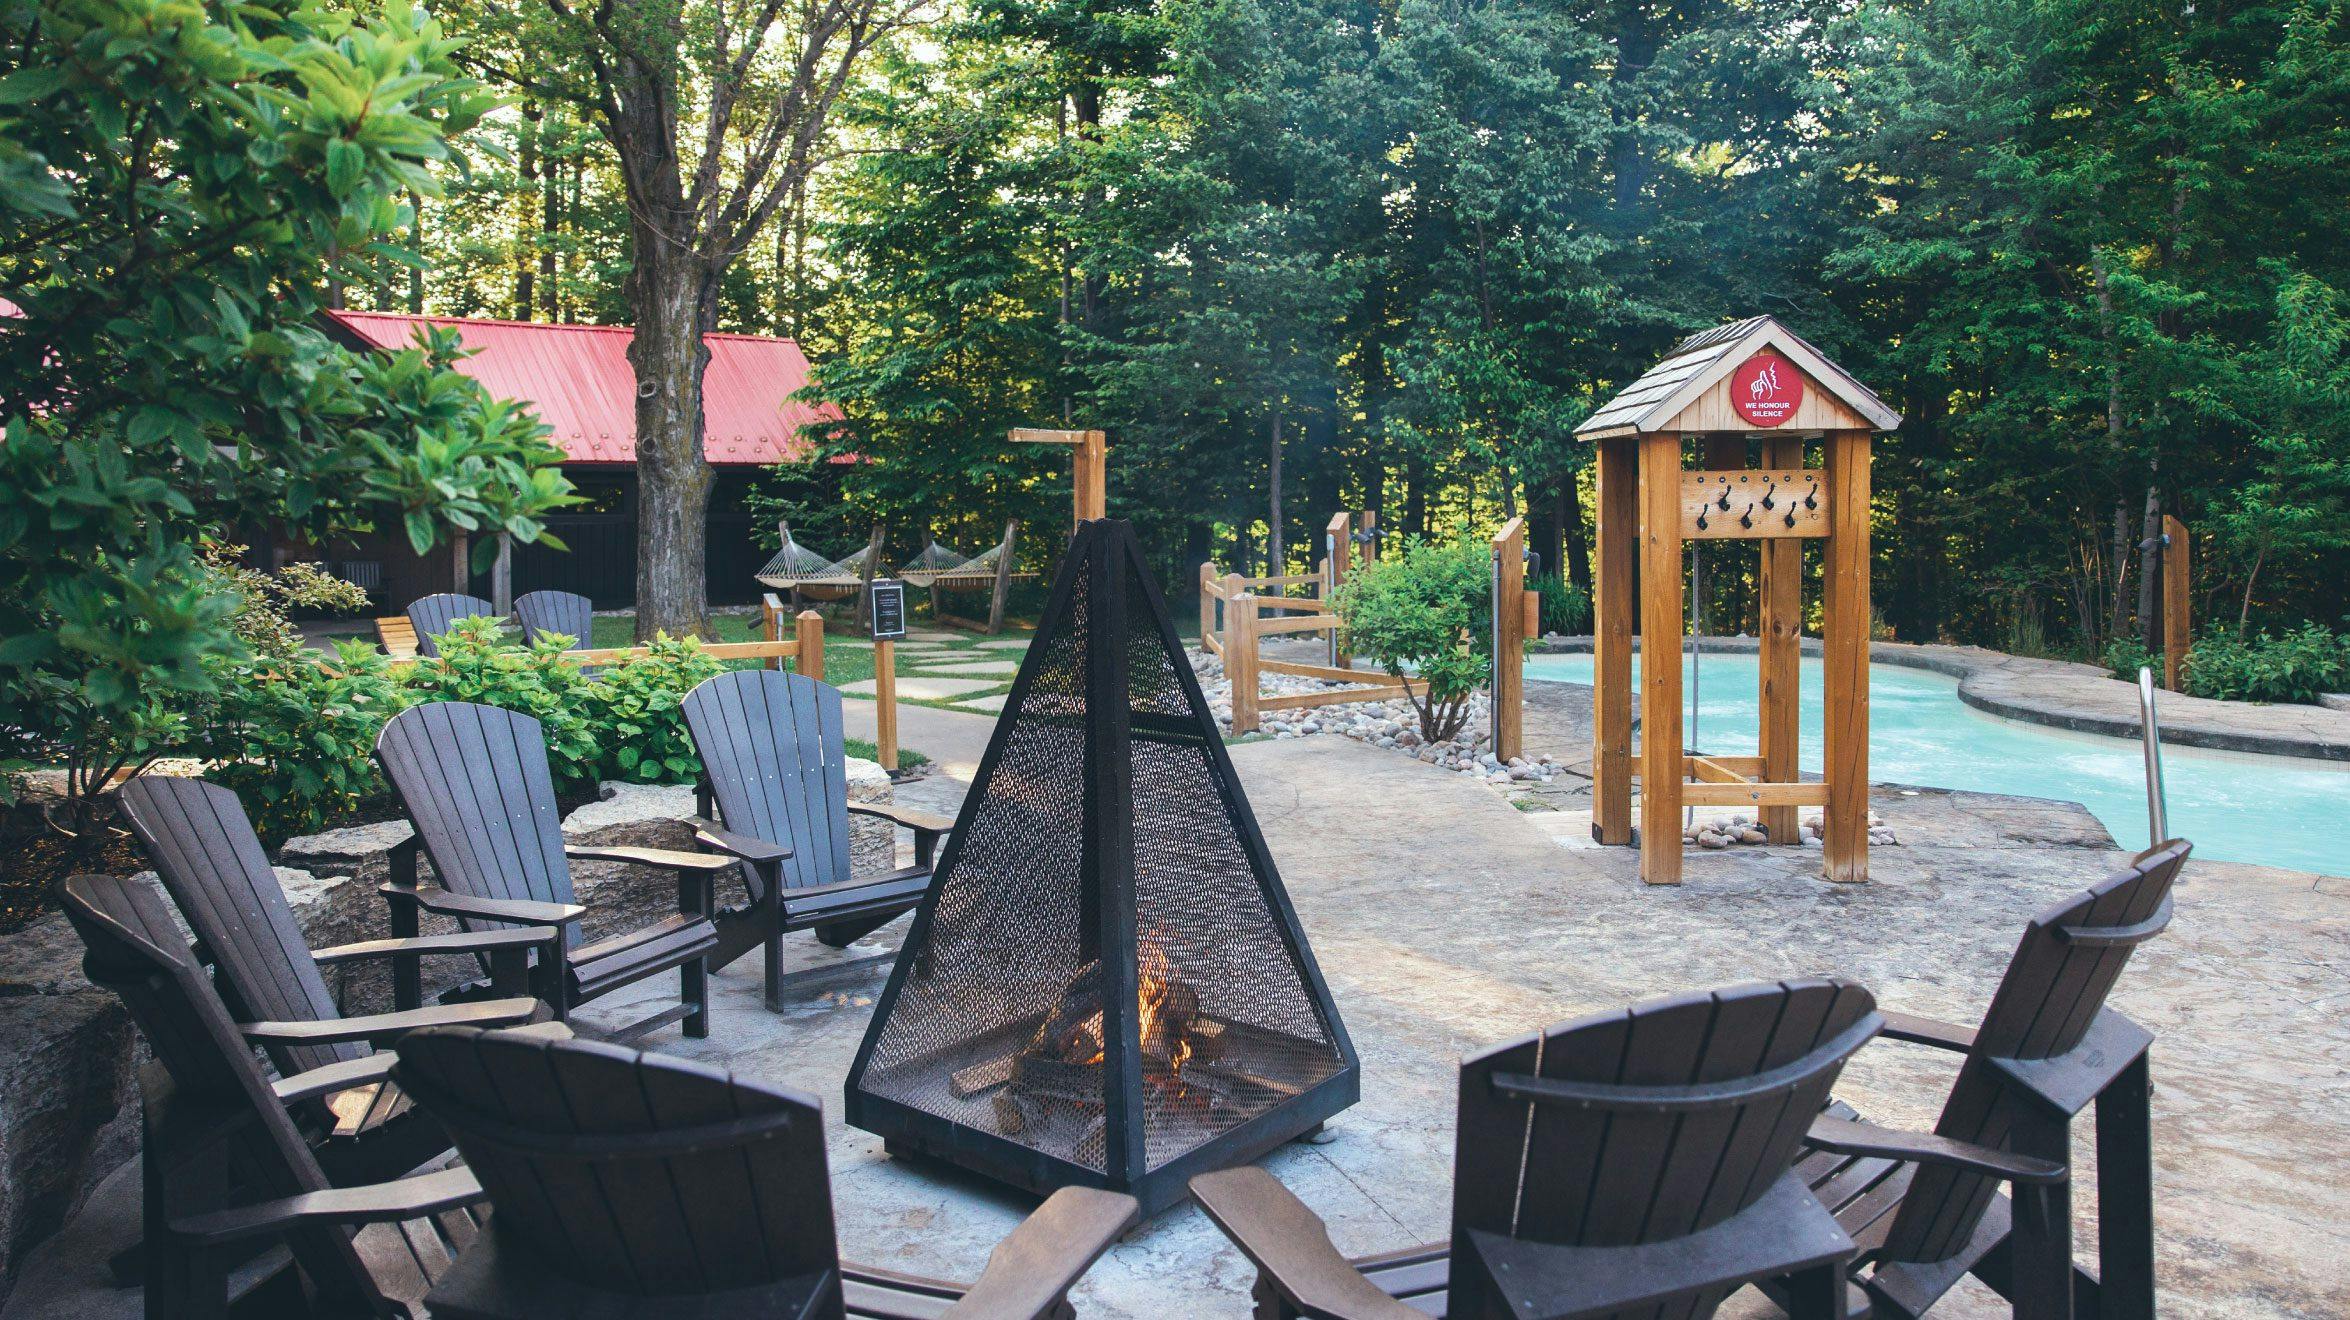 Outdoor fireplace and thermal Baths at Scandinave Spa Blue Mountain.